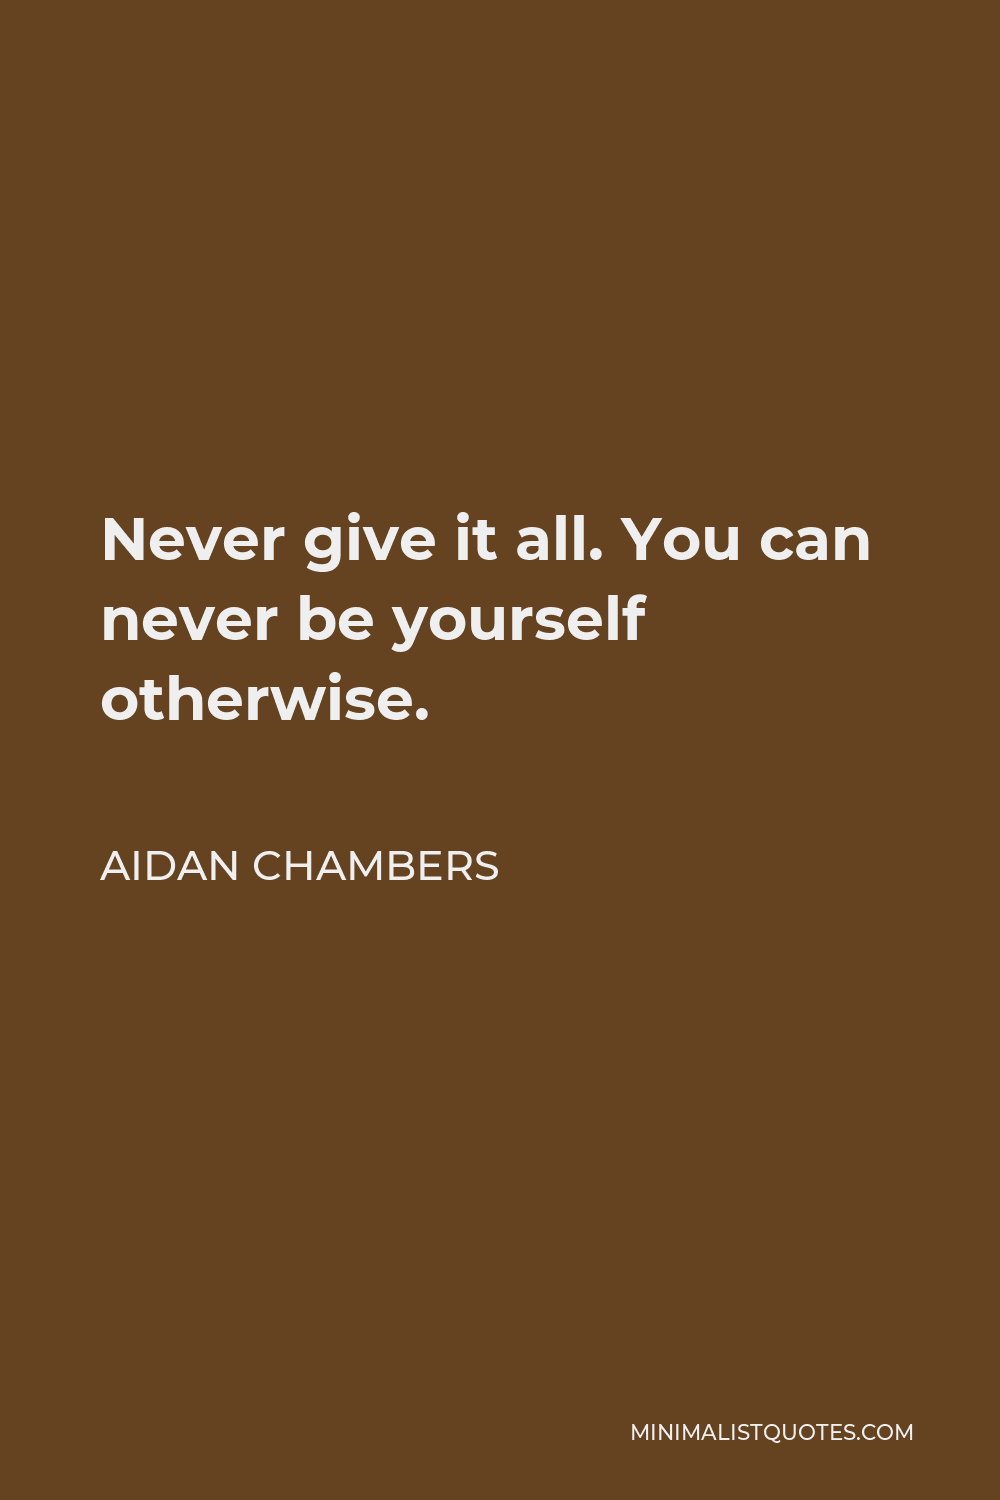 Aidan Chambers Quote - Never give it all. You can never be yourself otherwise.